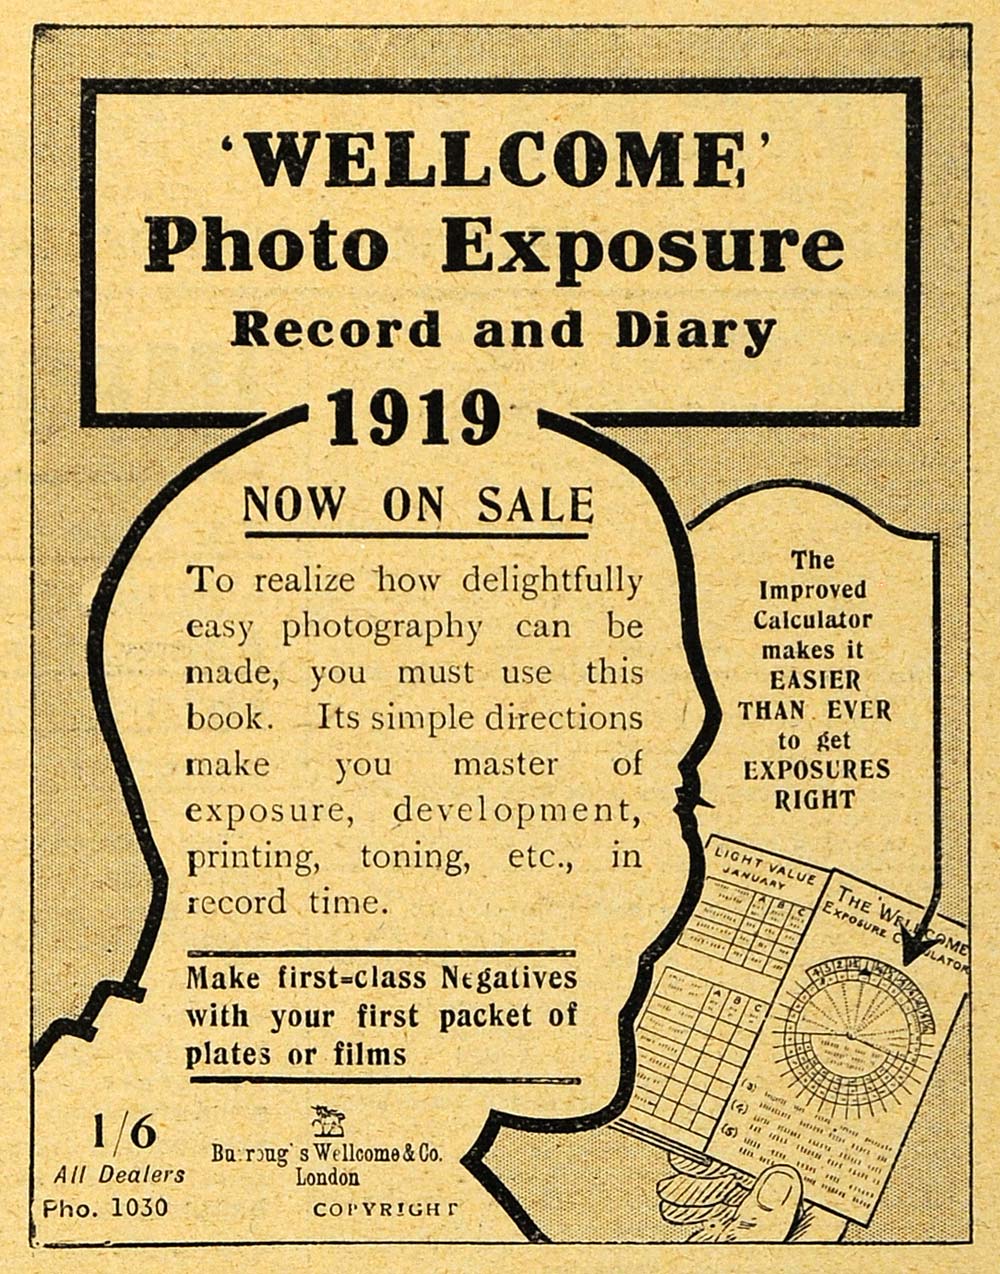 1918 Ad Burroughs Wellcome Photography Exposure Negatives Camera Film AMP1